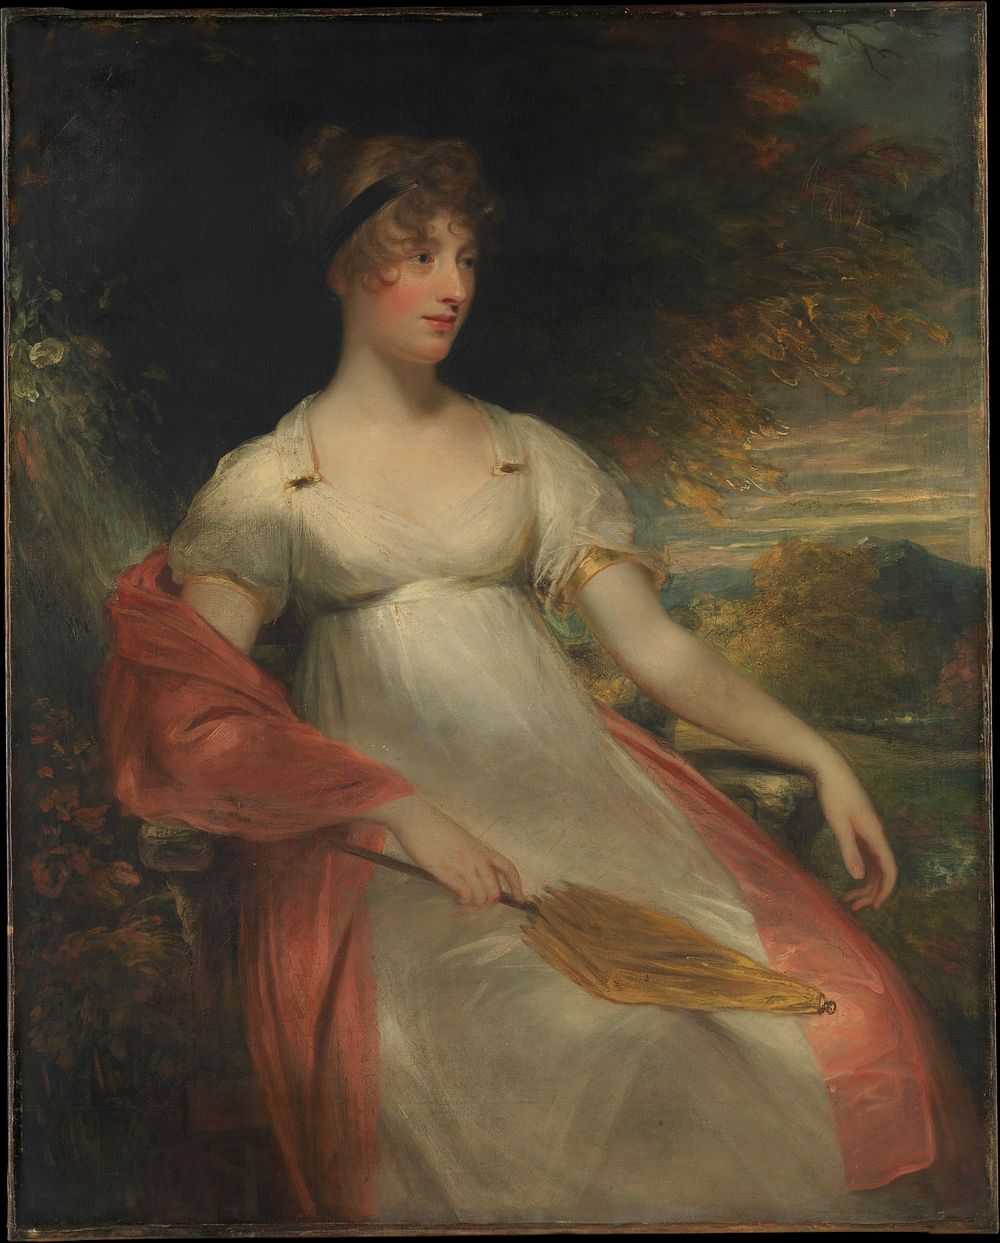 Portrait of a Woman by Sir William Beechey